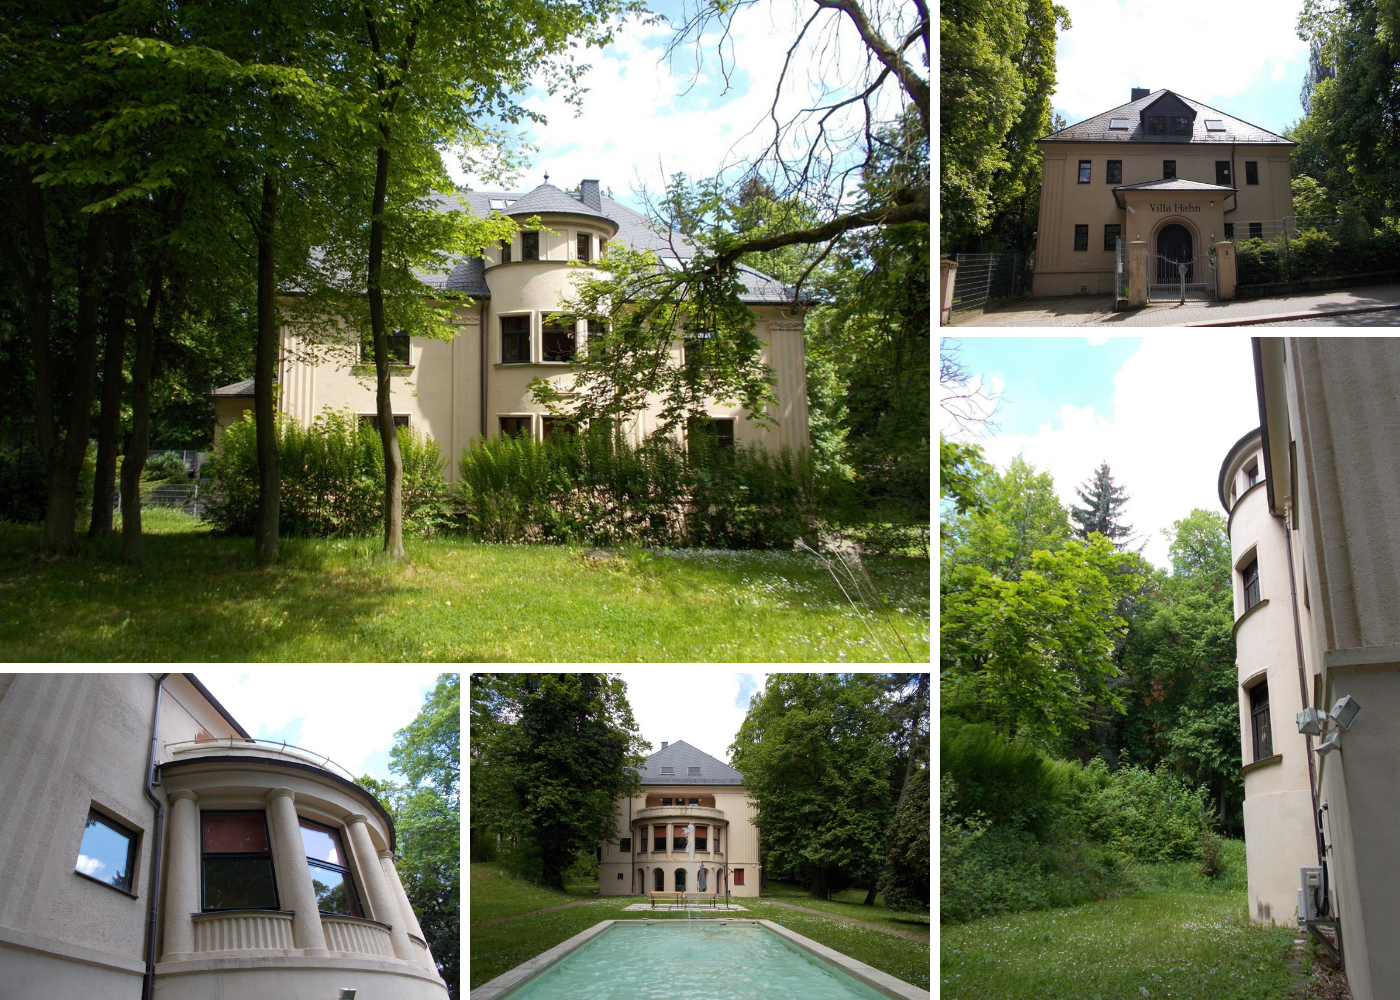 Impressions from the villa Hahn